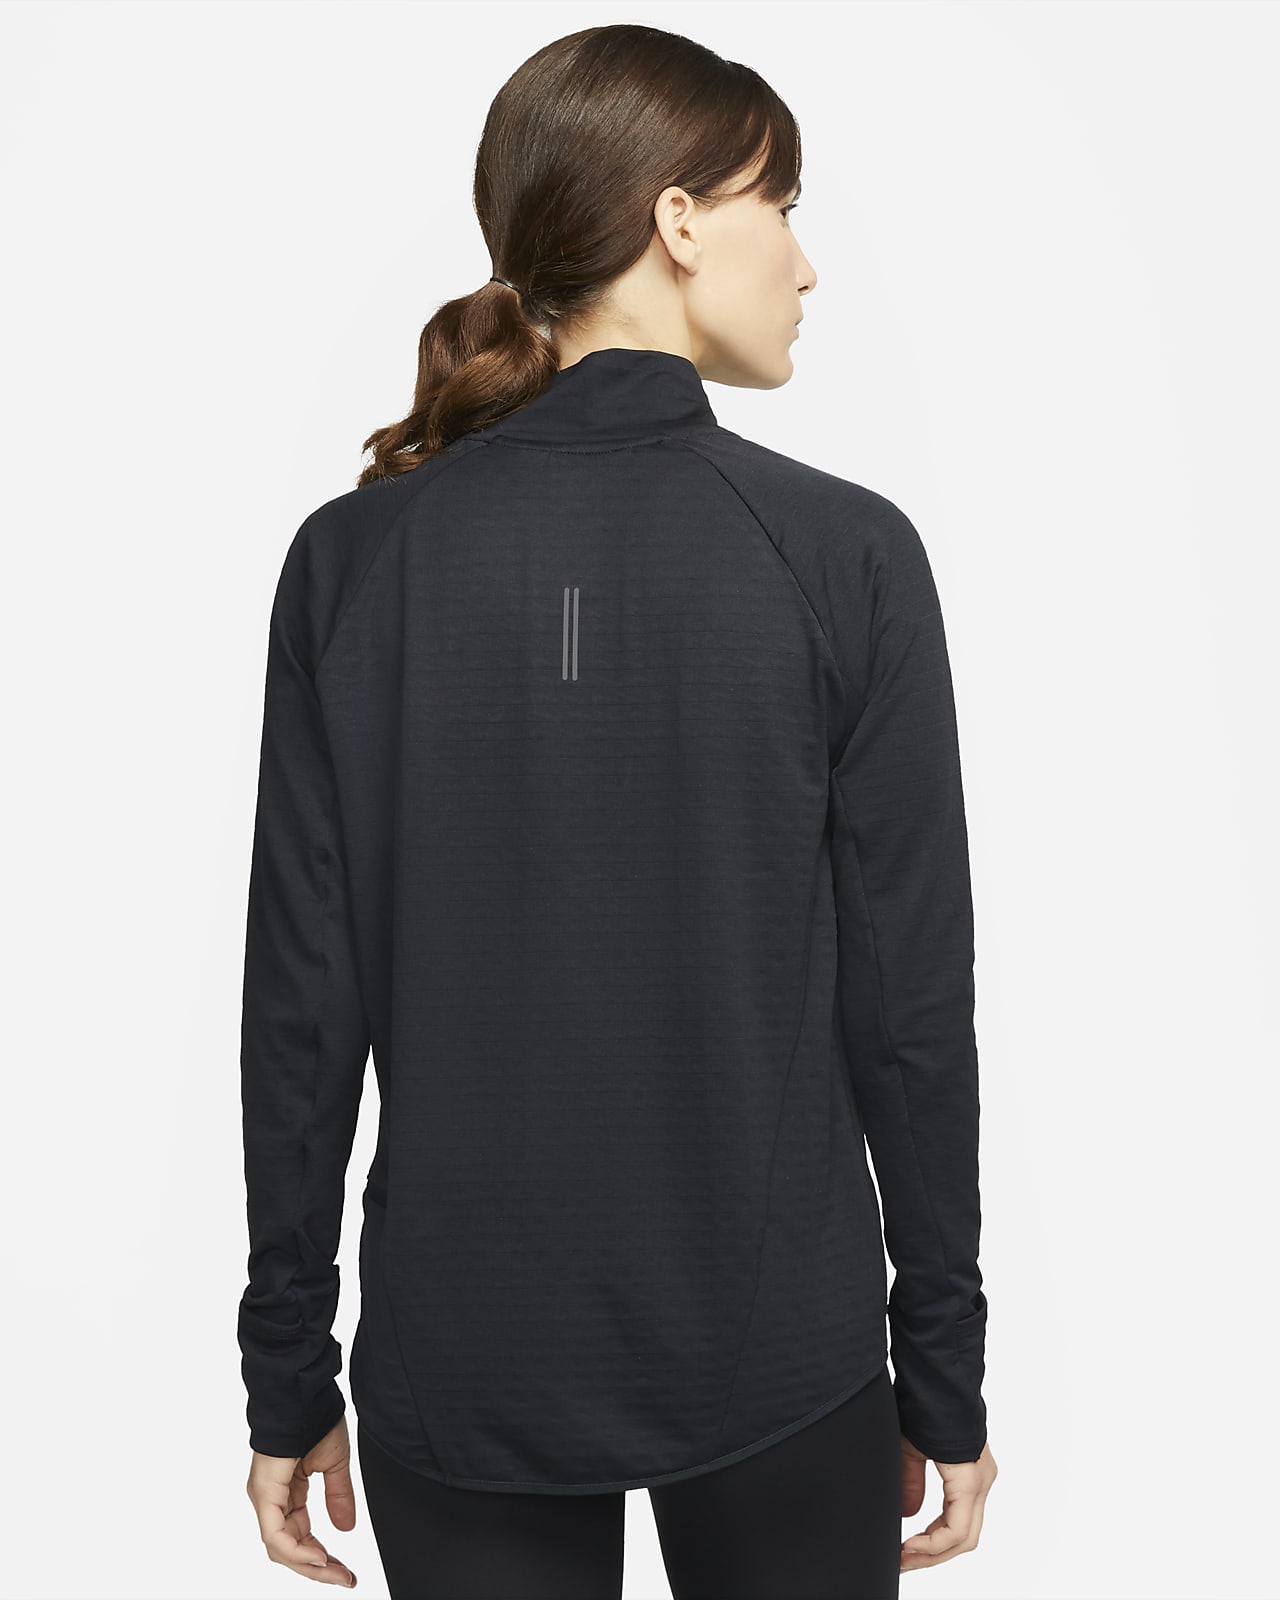 Therma-FIT Women's Running Top. Nike.com